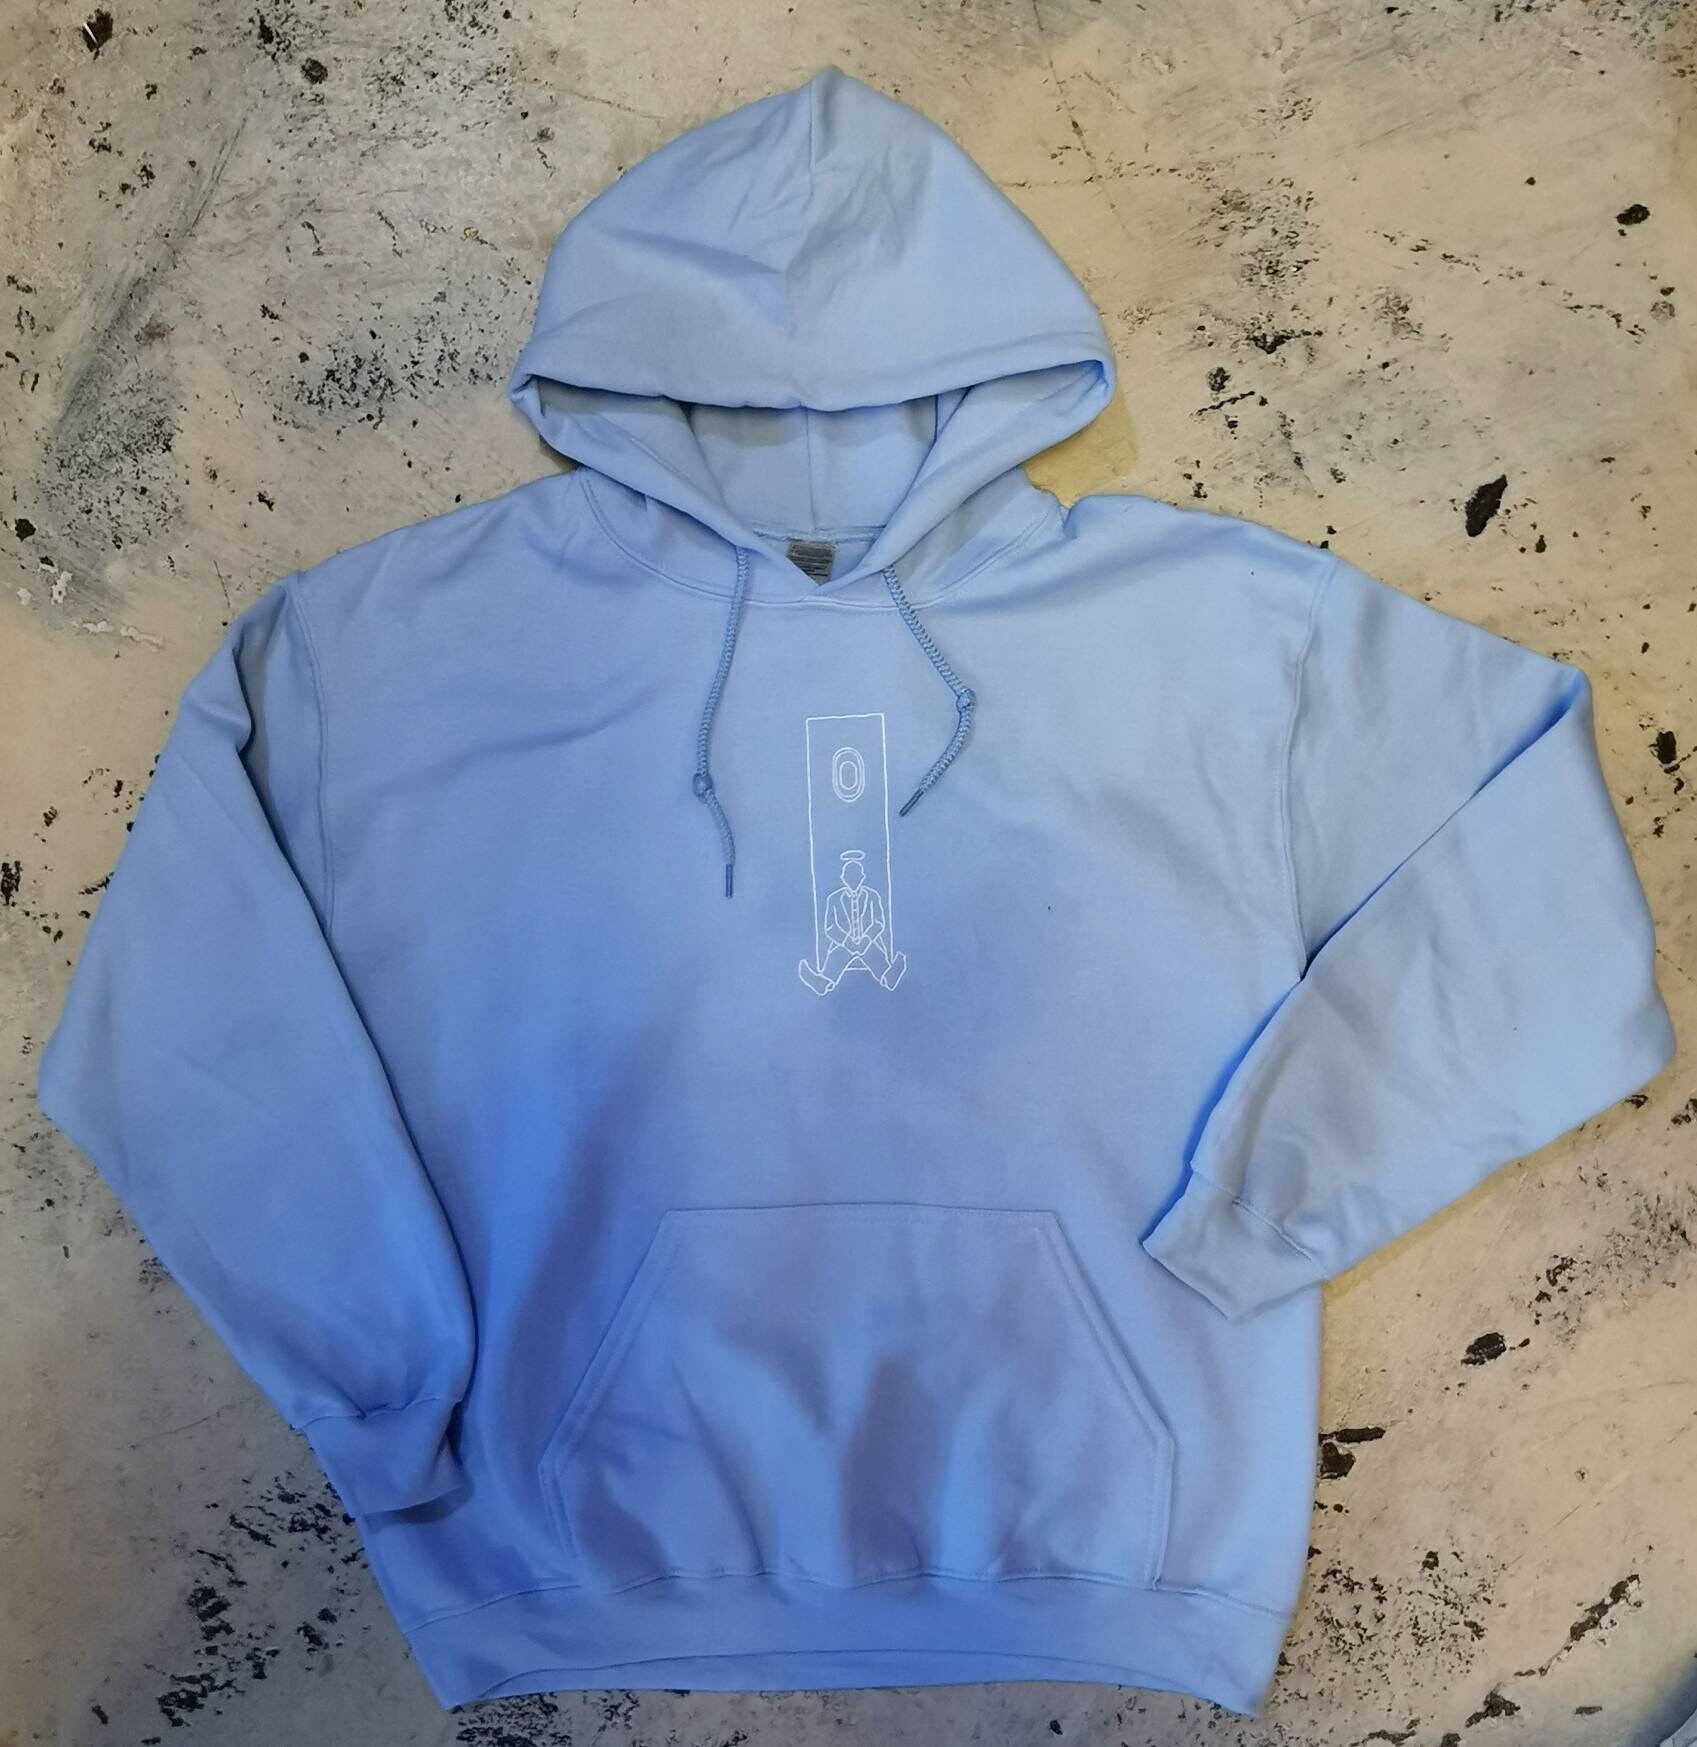 Mac Miller Swimming embroidered hoodie | Etsy